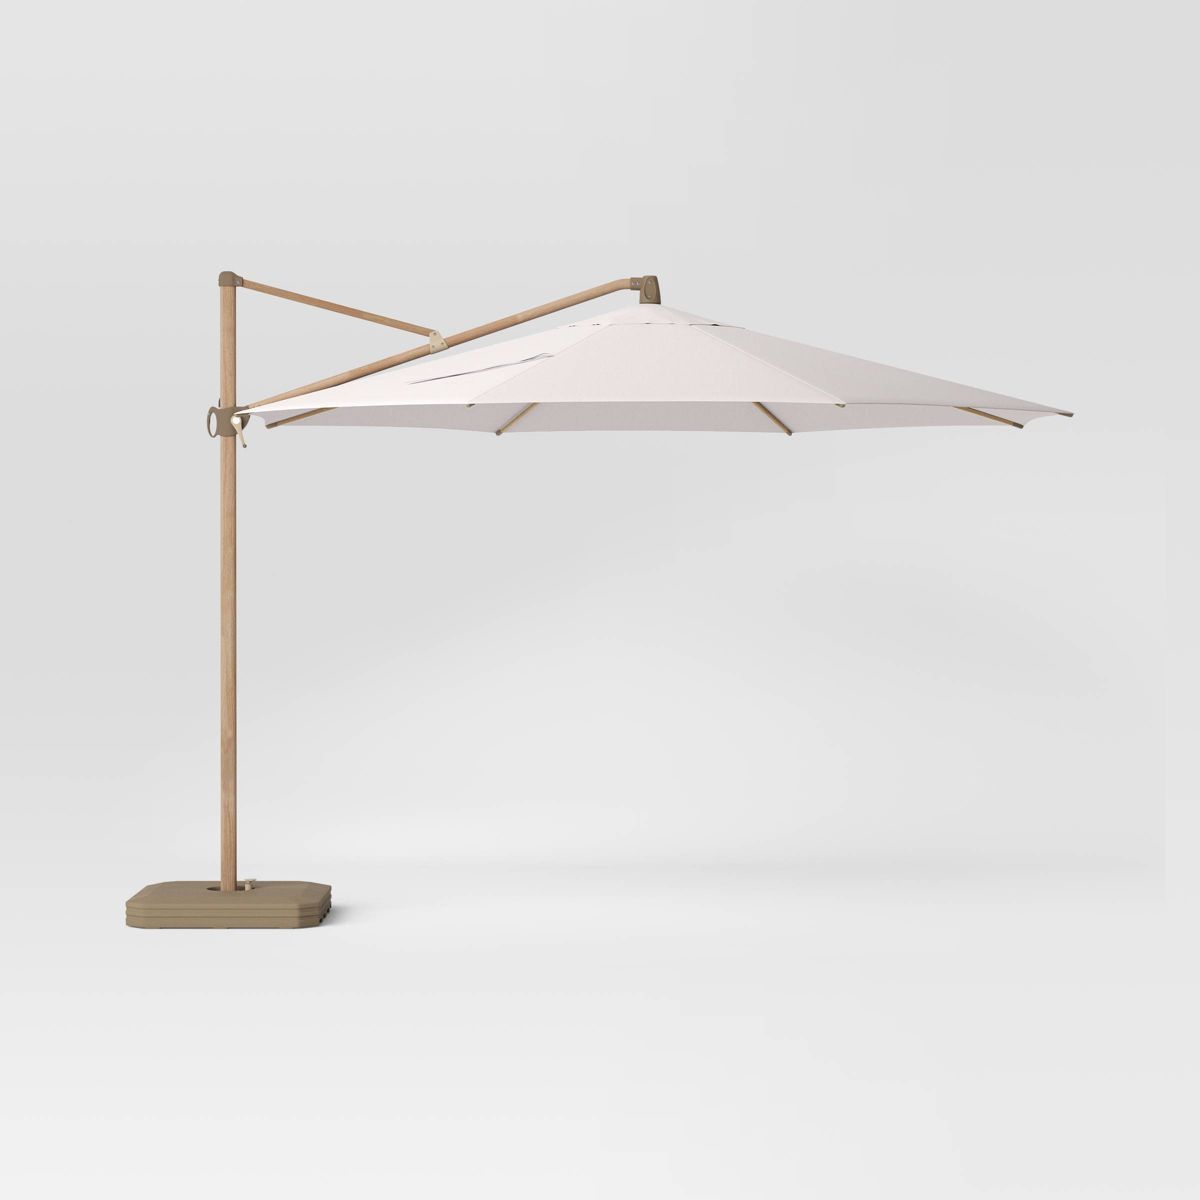 11' Round Offset Outdoor Patio Cantilever Umbrella with Light Wood Pole - Threshold™ | Target